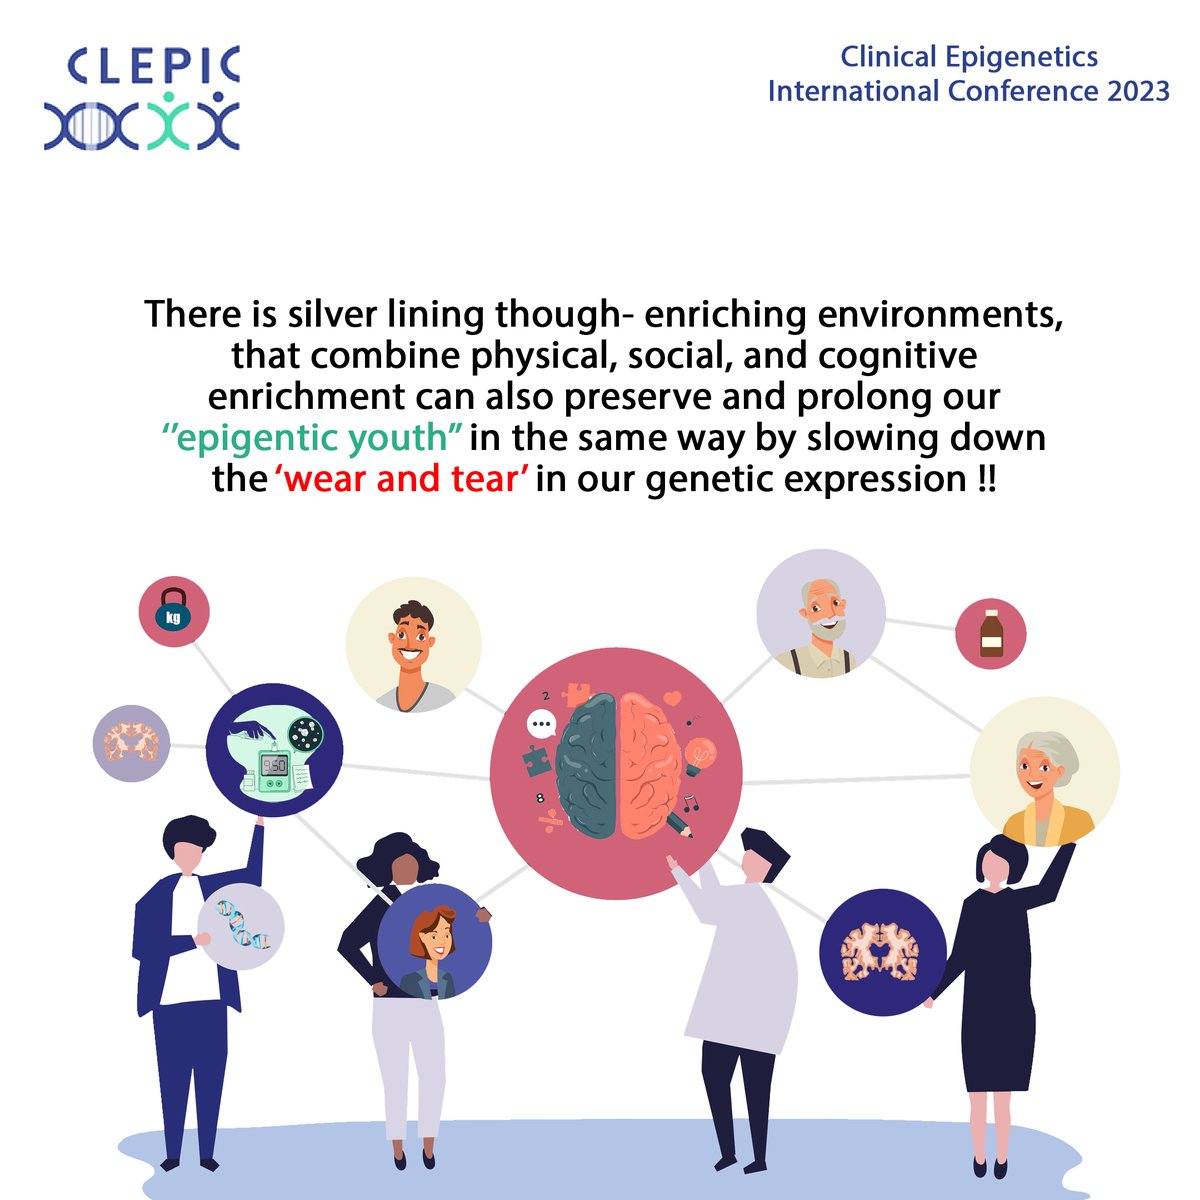 #epigeneticageing, more than just a number !!

A key topic of discussion at #CLEPIC2023 

@Epigenetics @EpiExperts @BRAINCITYWarsaw @NenckiInstitute #neuroepigenetics #healthyliving #ageingbetter #healthyageing